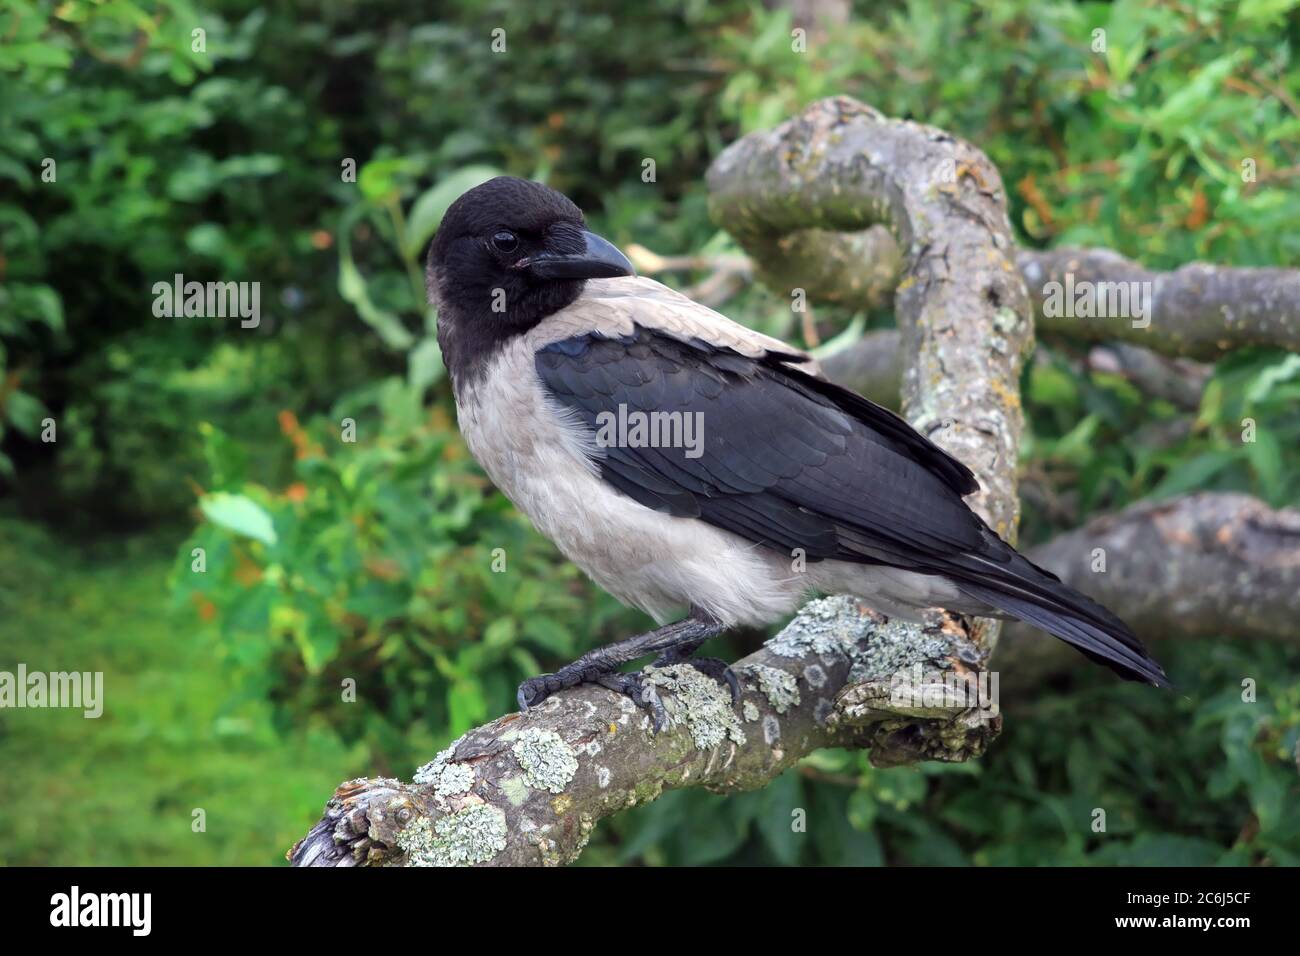 Young Hooded Crow, Corvus cornix, close up perched on a tree on a day of summer. Stock Photo